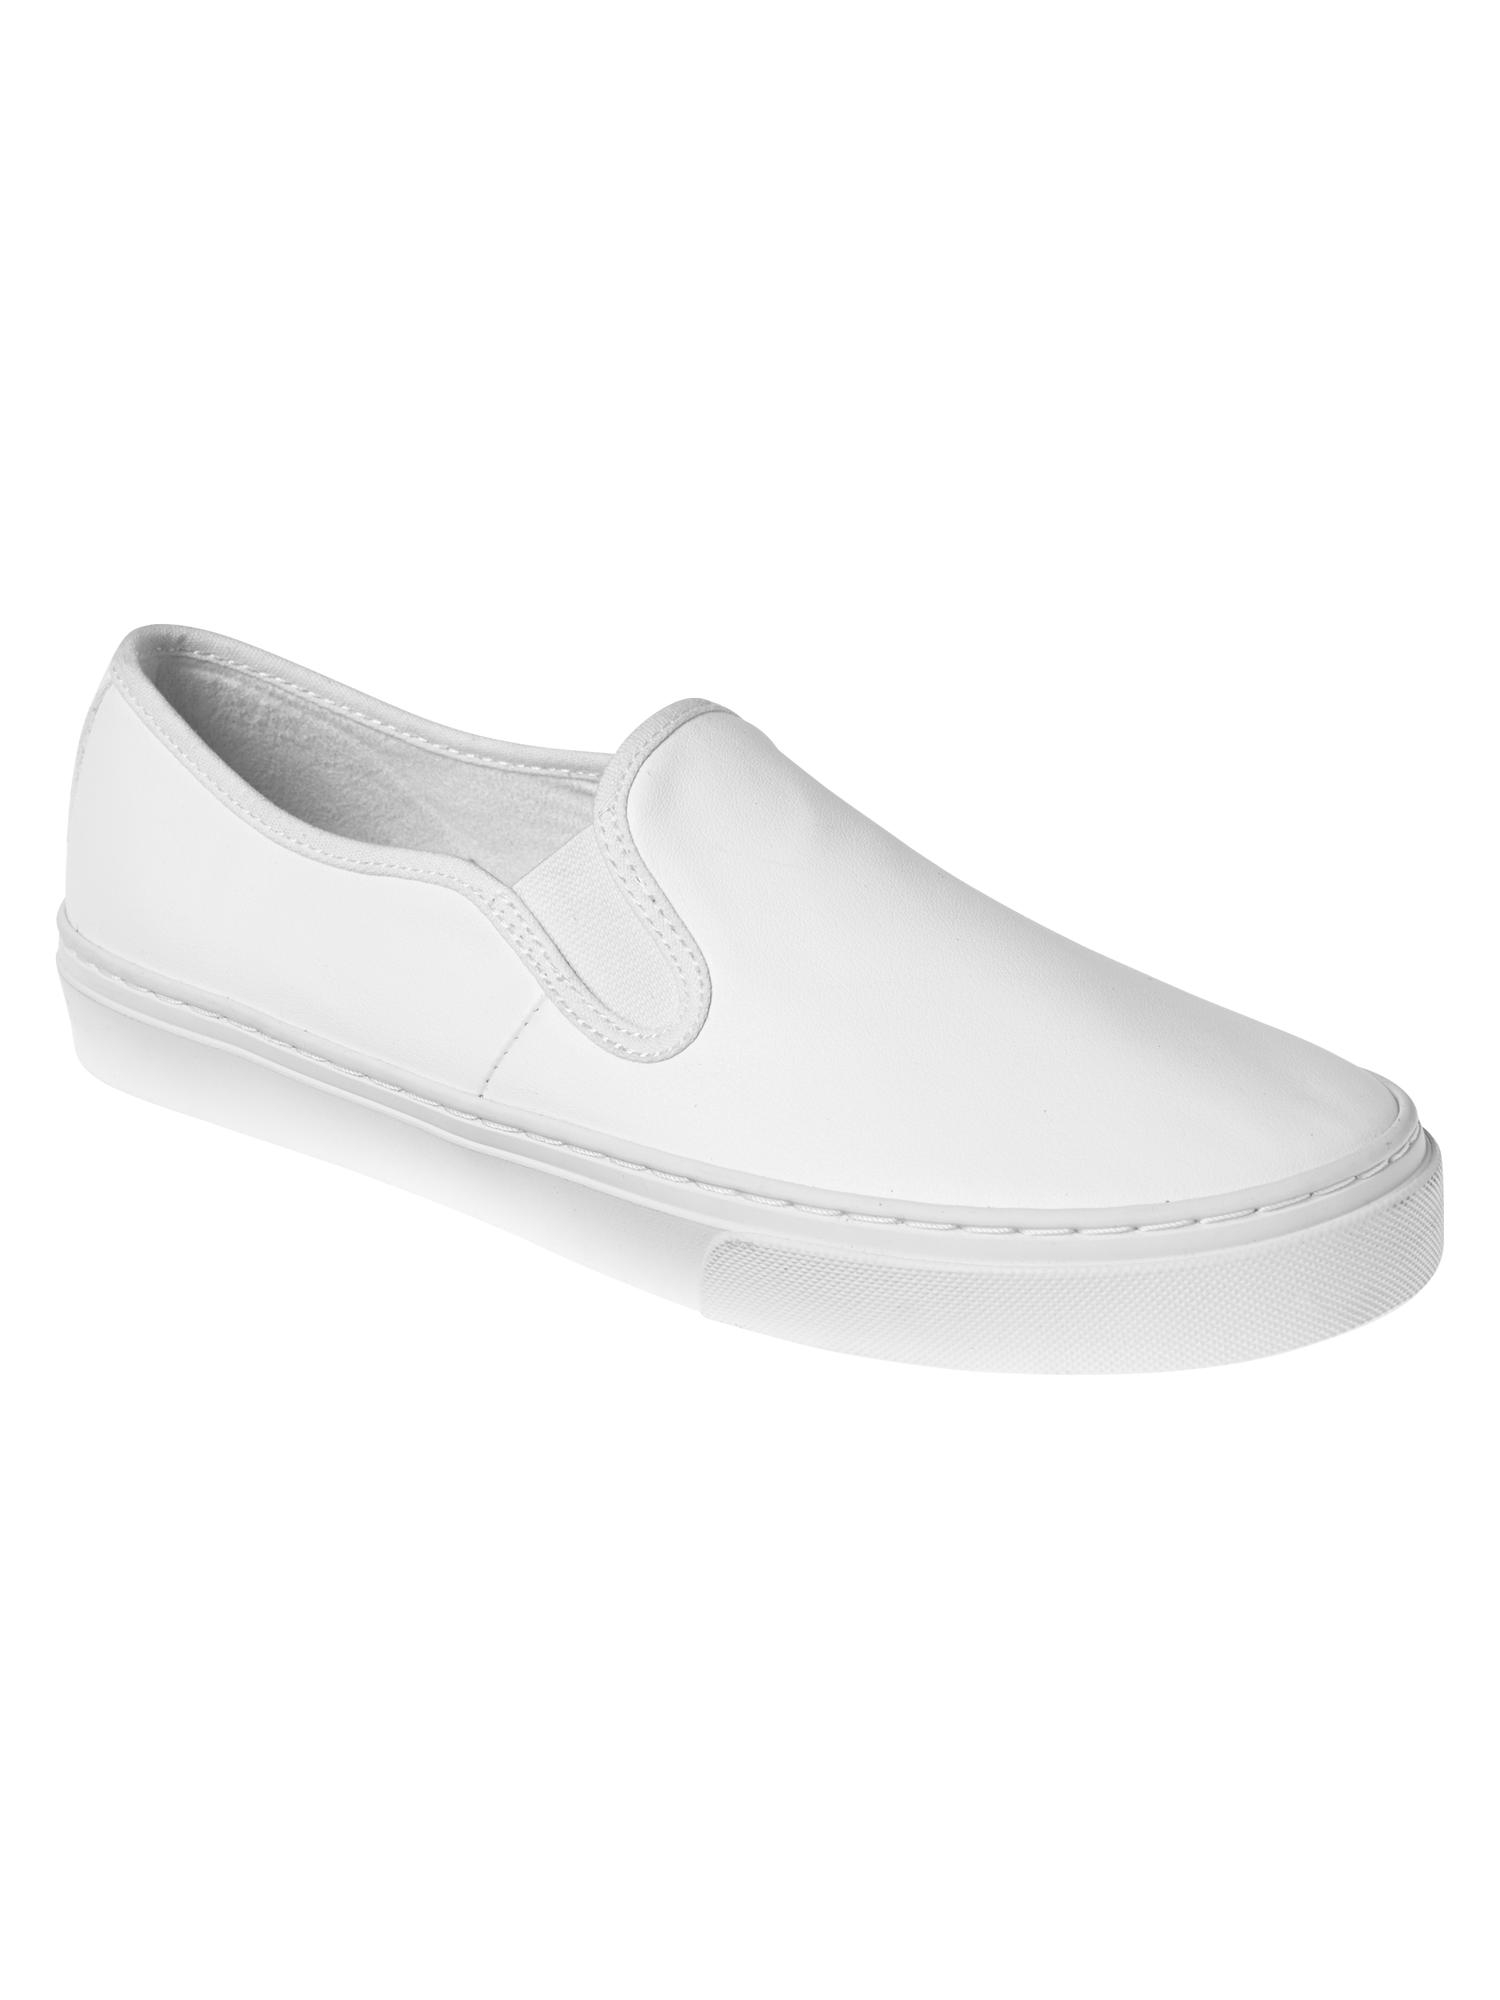 Gap Leather Slip-on Sneakers in White | Lyst